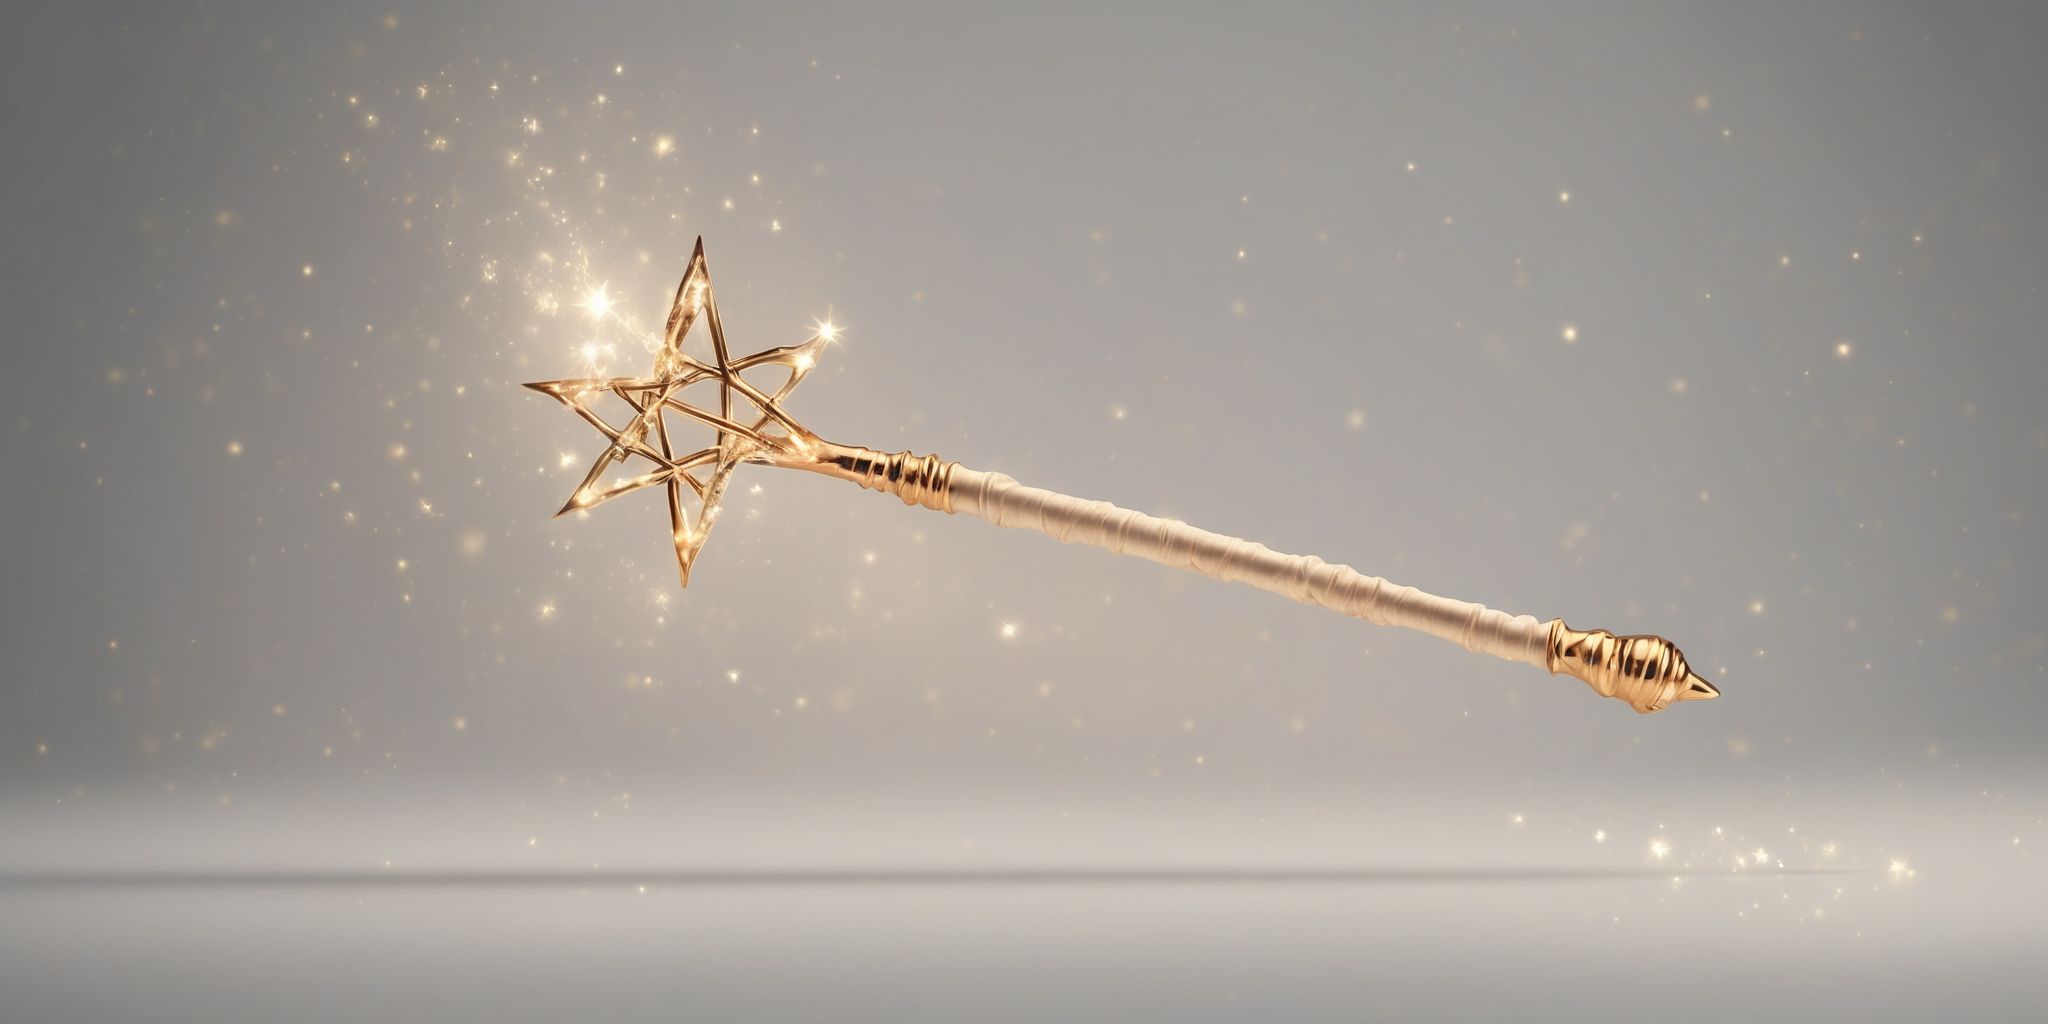 Magic wand  in realistic, photographic style